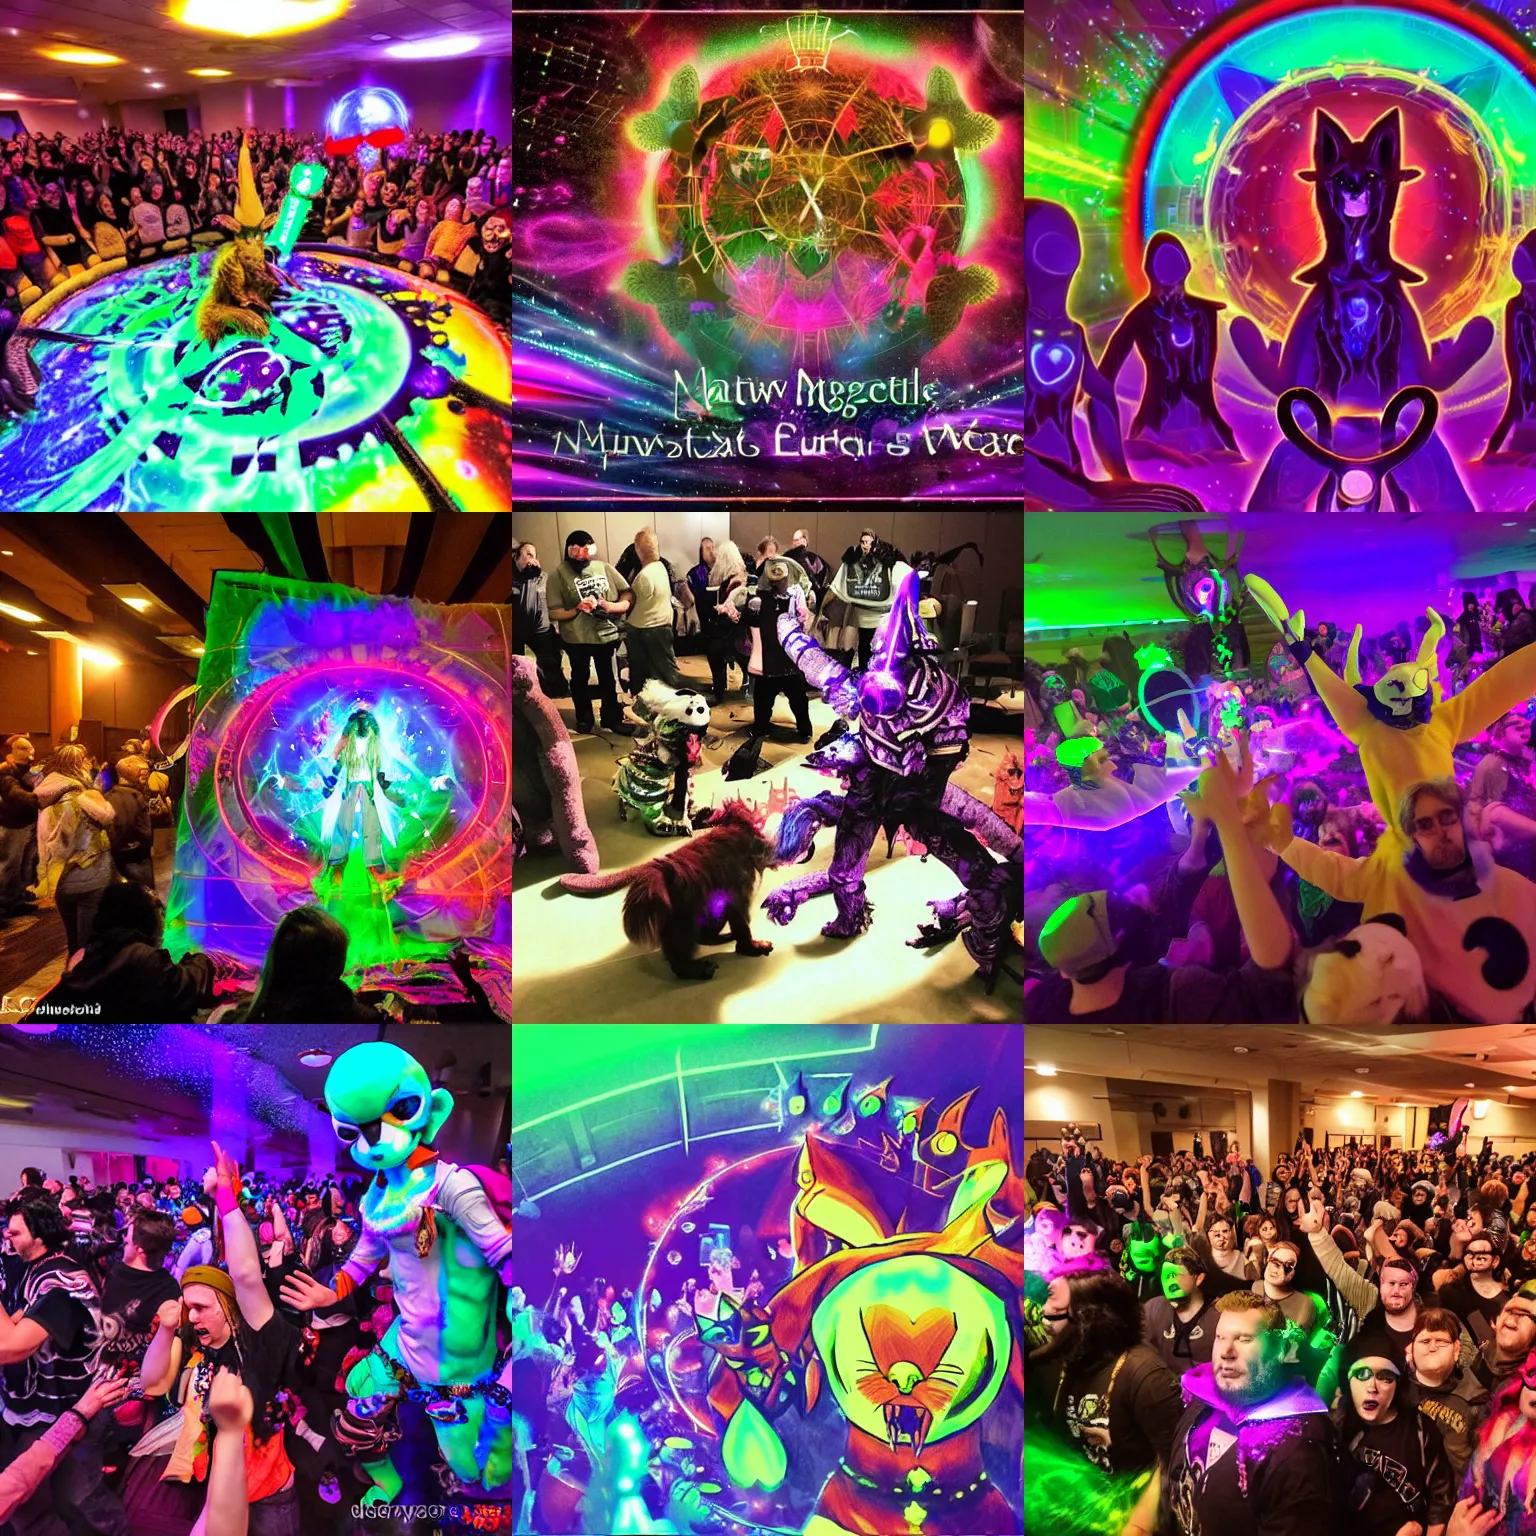 Prompt: Photo taken at Midwest FurFest's yearly fursuiter ritual/rave to keep the Astral Gate closed and hold the World-Eater at bay and so allow a new year to come. Numinous manifestation levels were at record high, resulting in several existential topological defects being breached alongside their concordant cosmological spacetime tearing, but the experienced convention organizers found levels manageable with the ultimate count of quantum over-entanglements and sundering ranging between an occurrence of St. Elmo's fire and a sustained incidence of upper-atmospheric lightning.